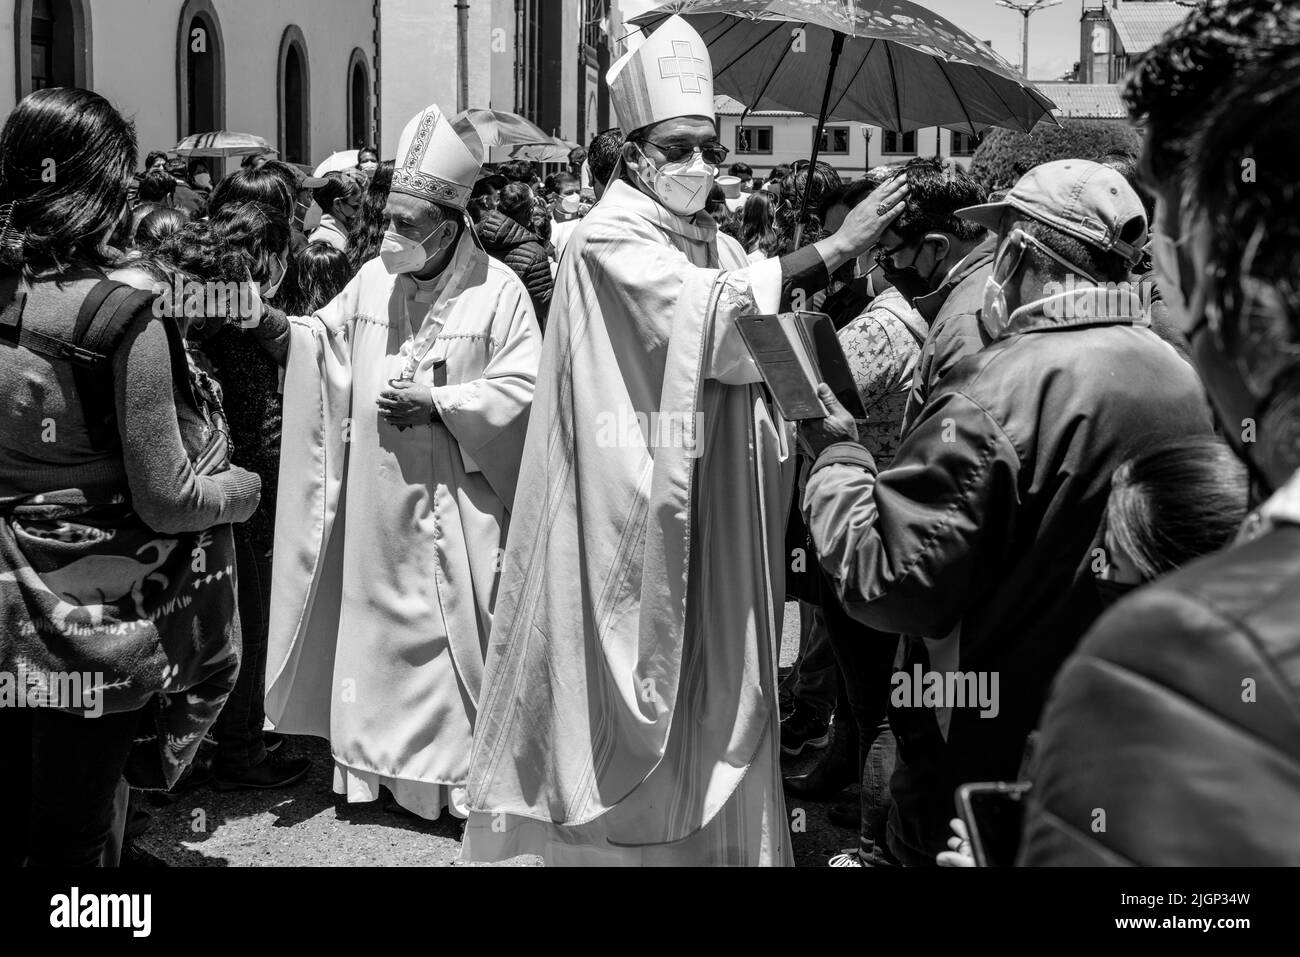 Catholic Priests Bless People In The Crowd After An Outdoor Mass In The Plaza De Armas, Puno, Puno Province, Peru. Stock Photo